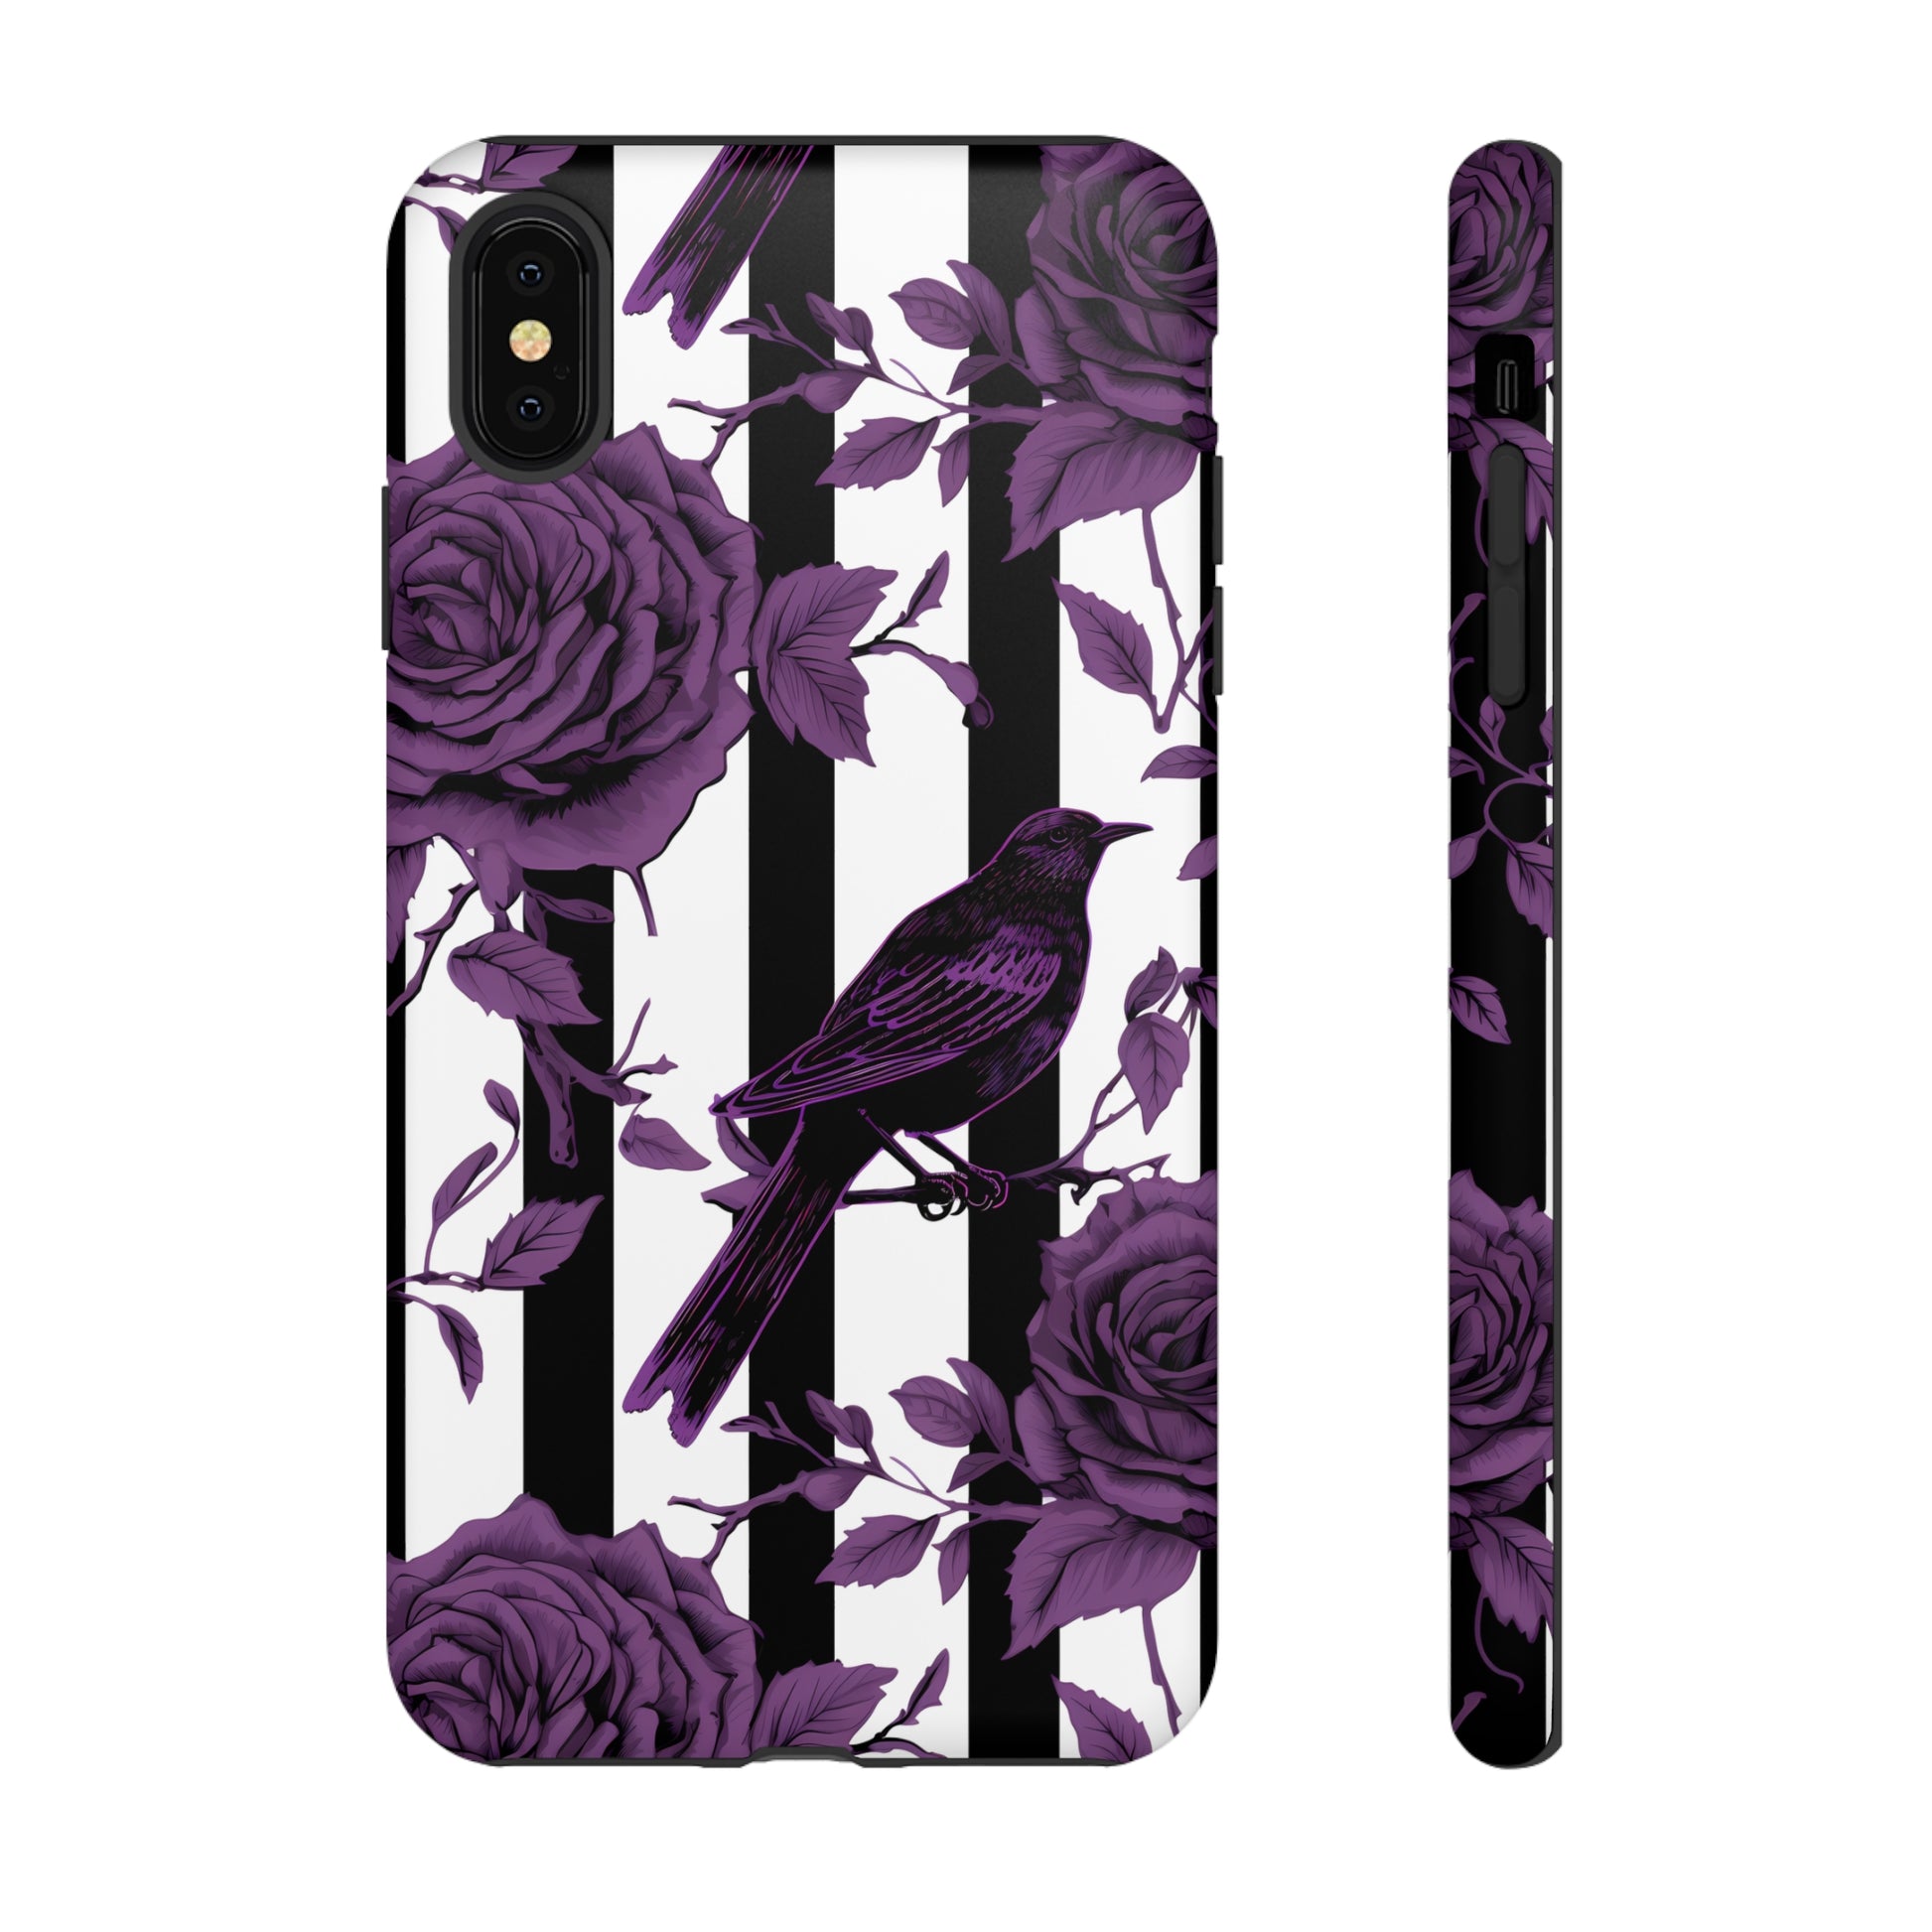 Striped Crows and Roses Tough Cases for iPhone Samsung Google PhonesPhone CaseVTZdesignsiPhone XS MAXMatteAccessoriescrowsGlossy